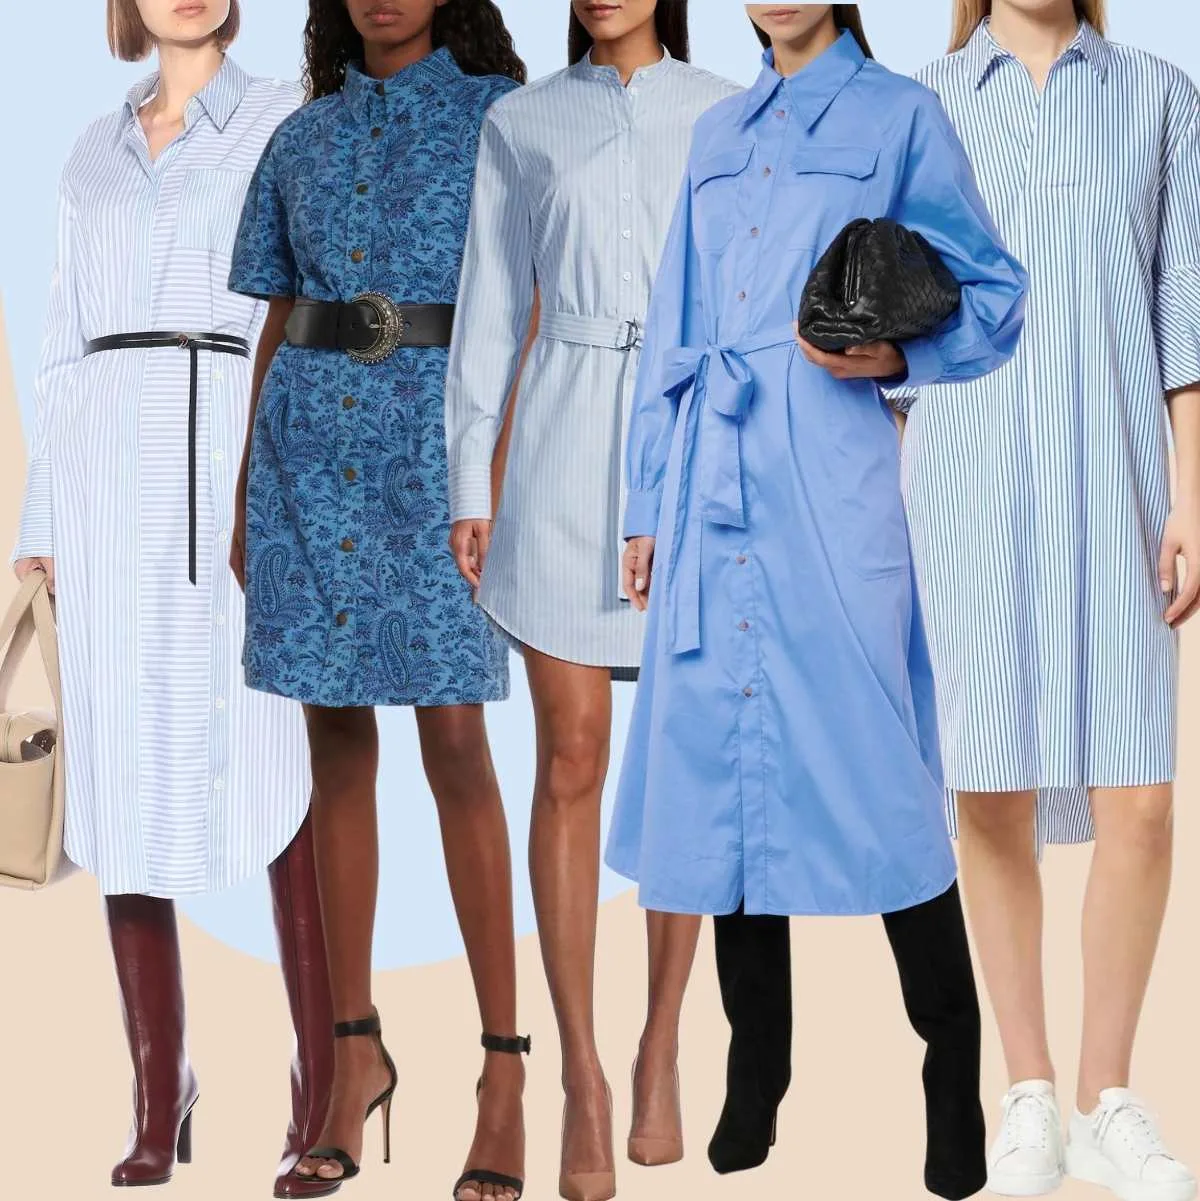 How to Style a Shirt Dress Outfit with the Right Shoes & Accessories